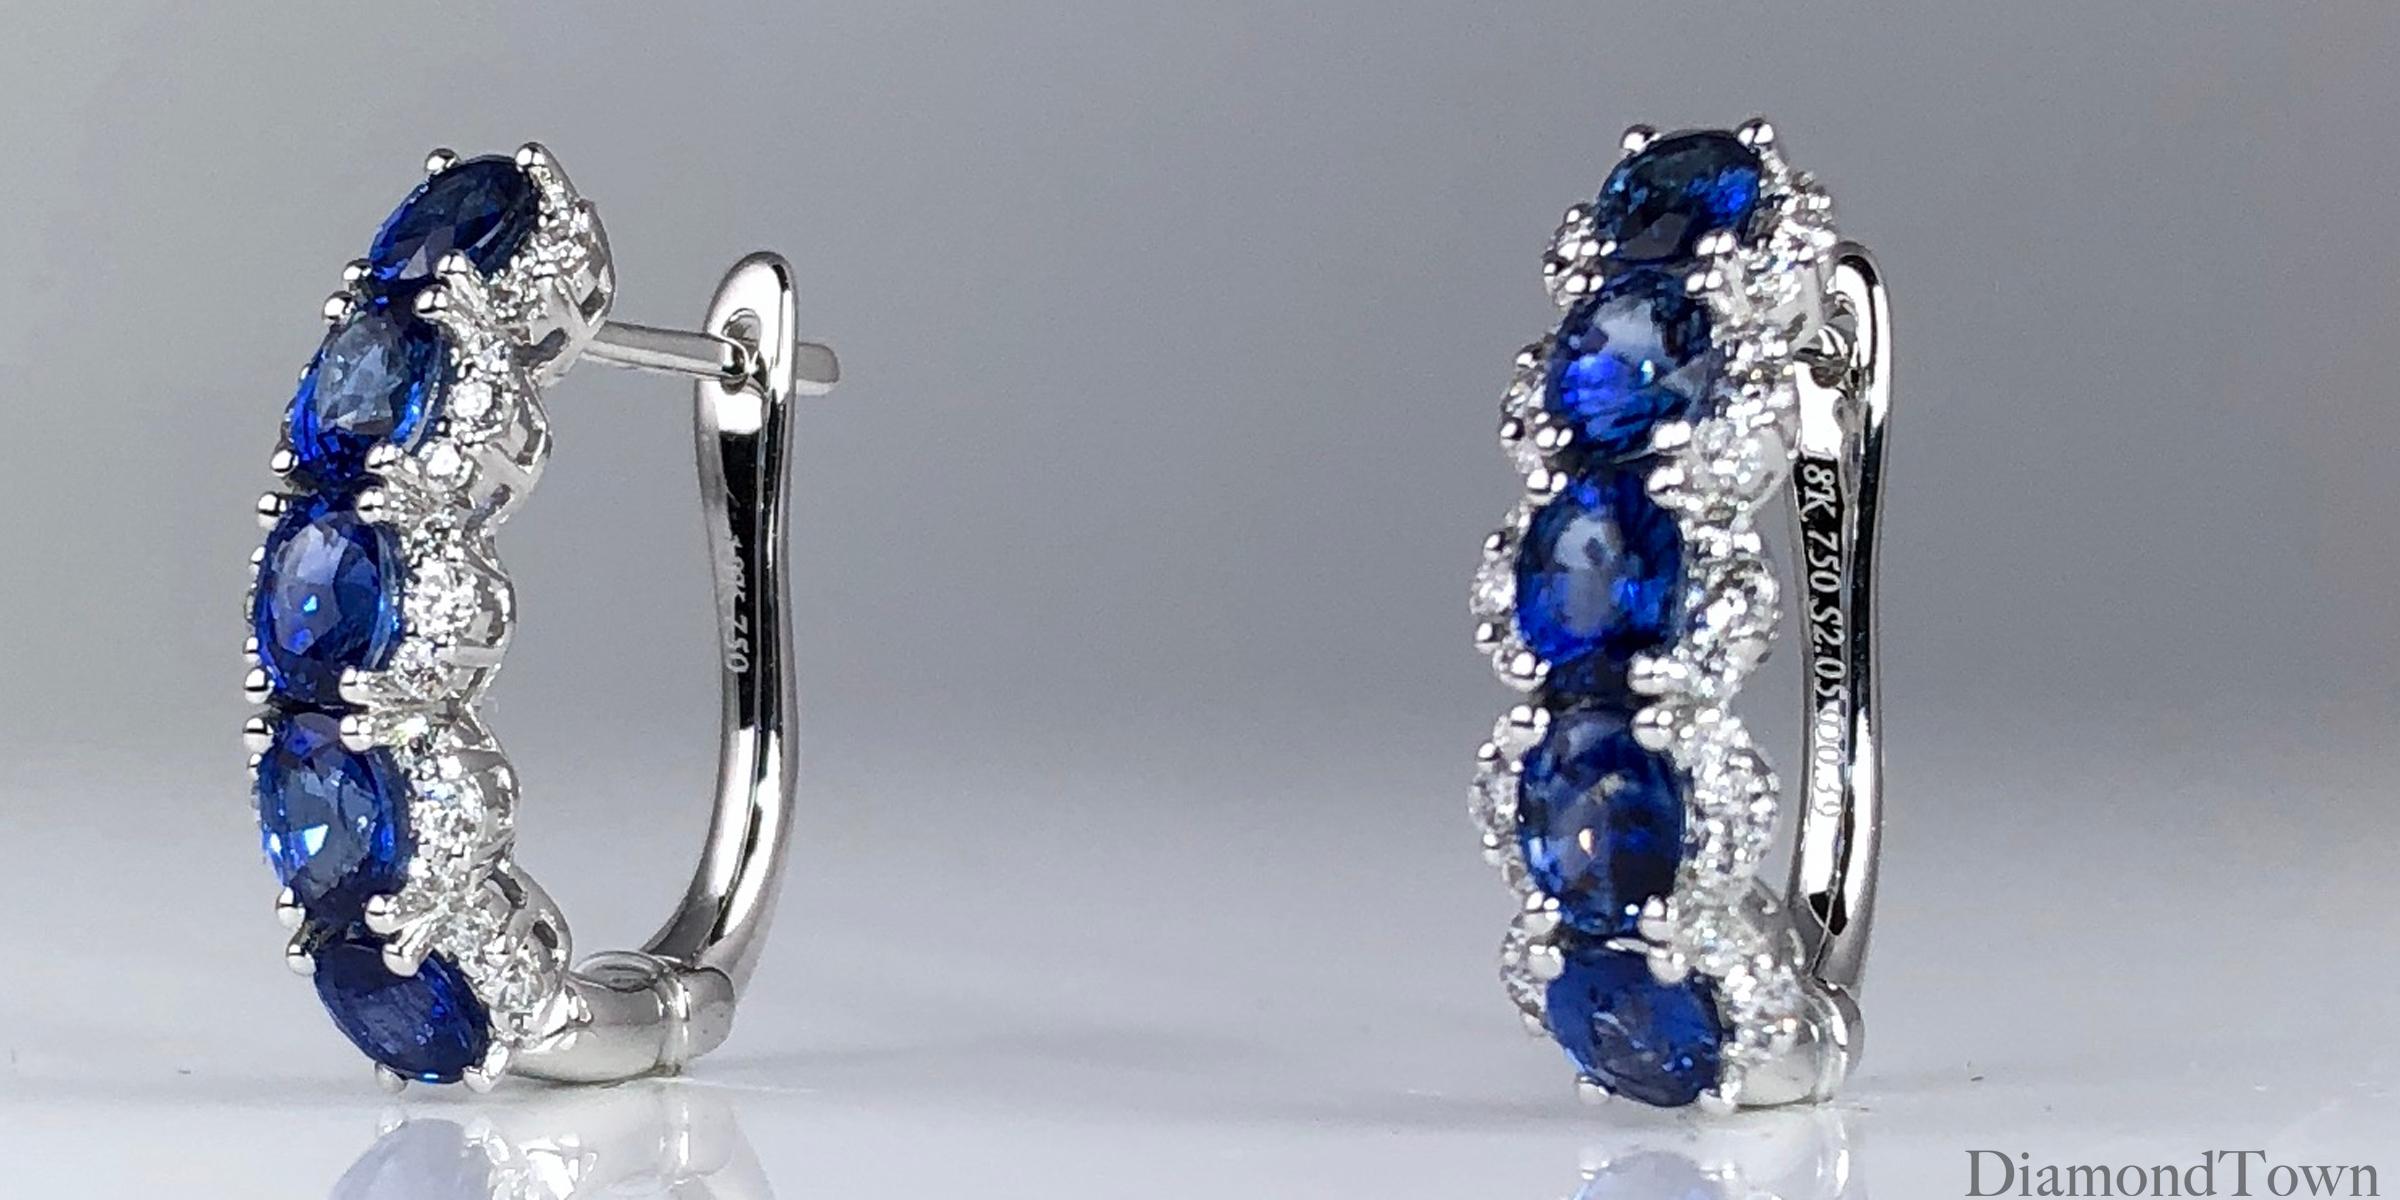 These lovely hoop earrings feature 5 oval cut blue sapphires (total weight 2.05 carats), wrapped among round diamonds (total diamond weight 0.39 carats). The earrings close securely by lever-back. Set in 18k White Gold.

Many of our items have